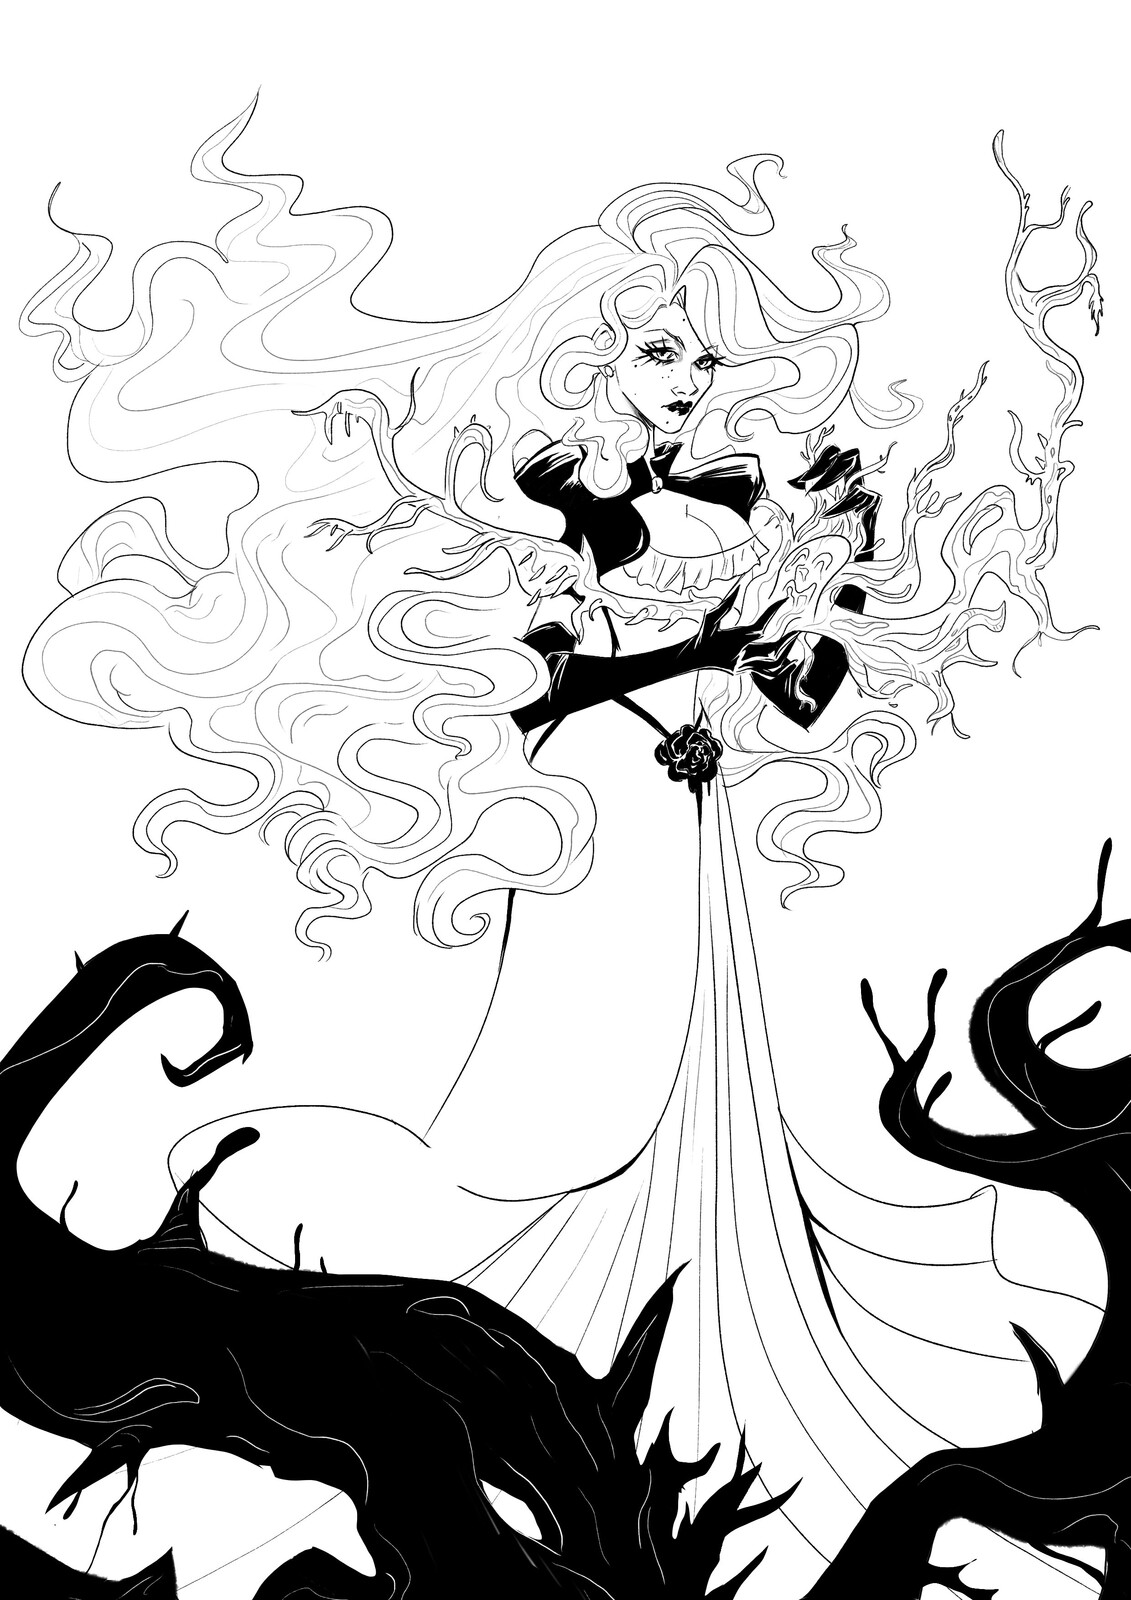 Inking/lineart.